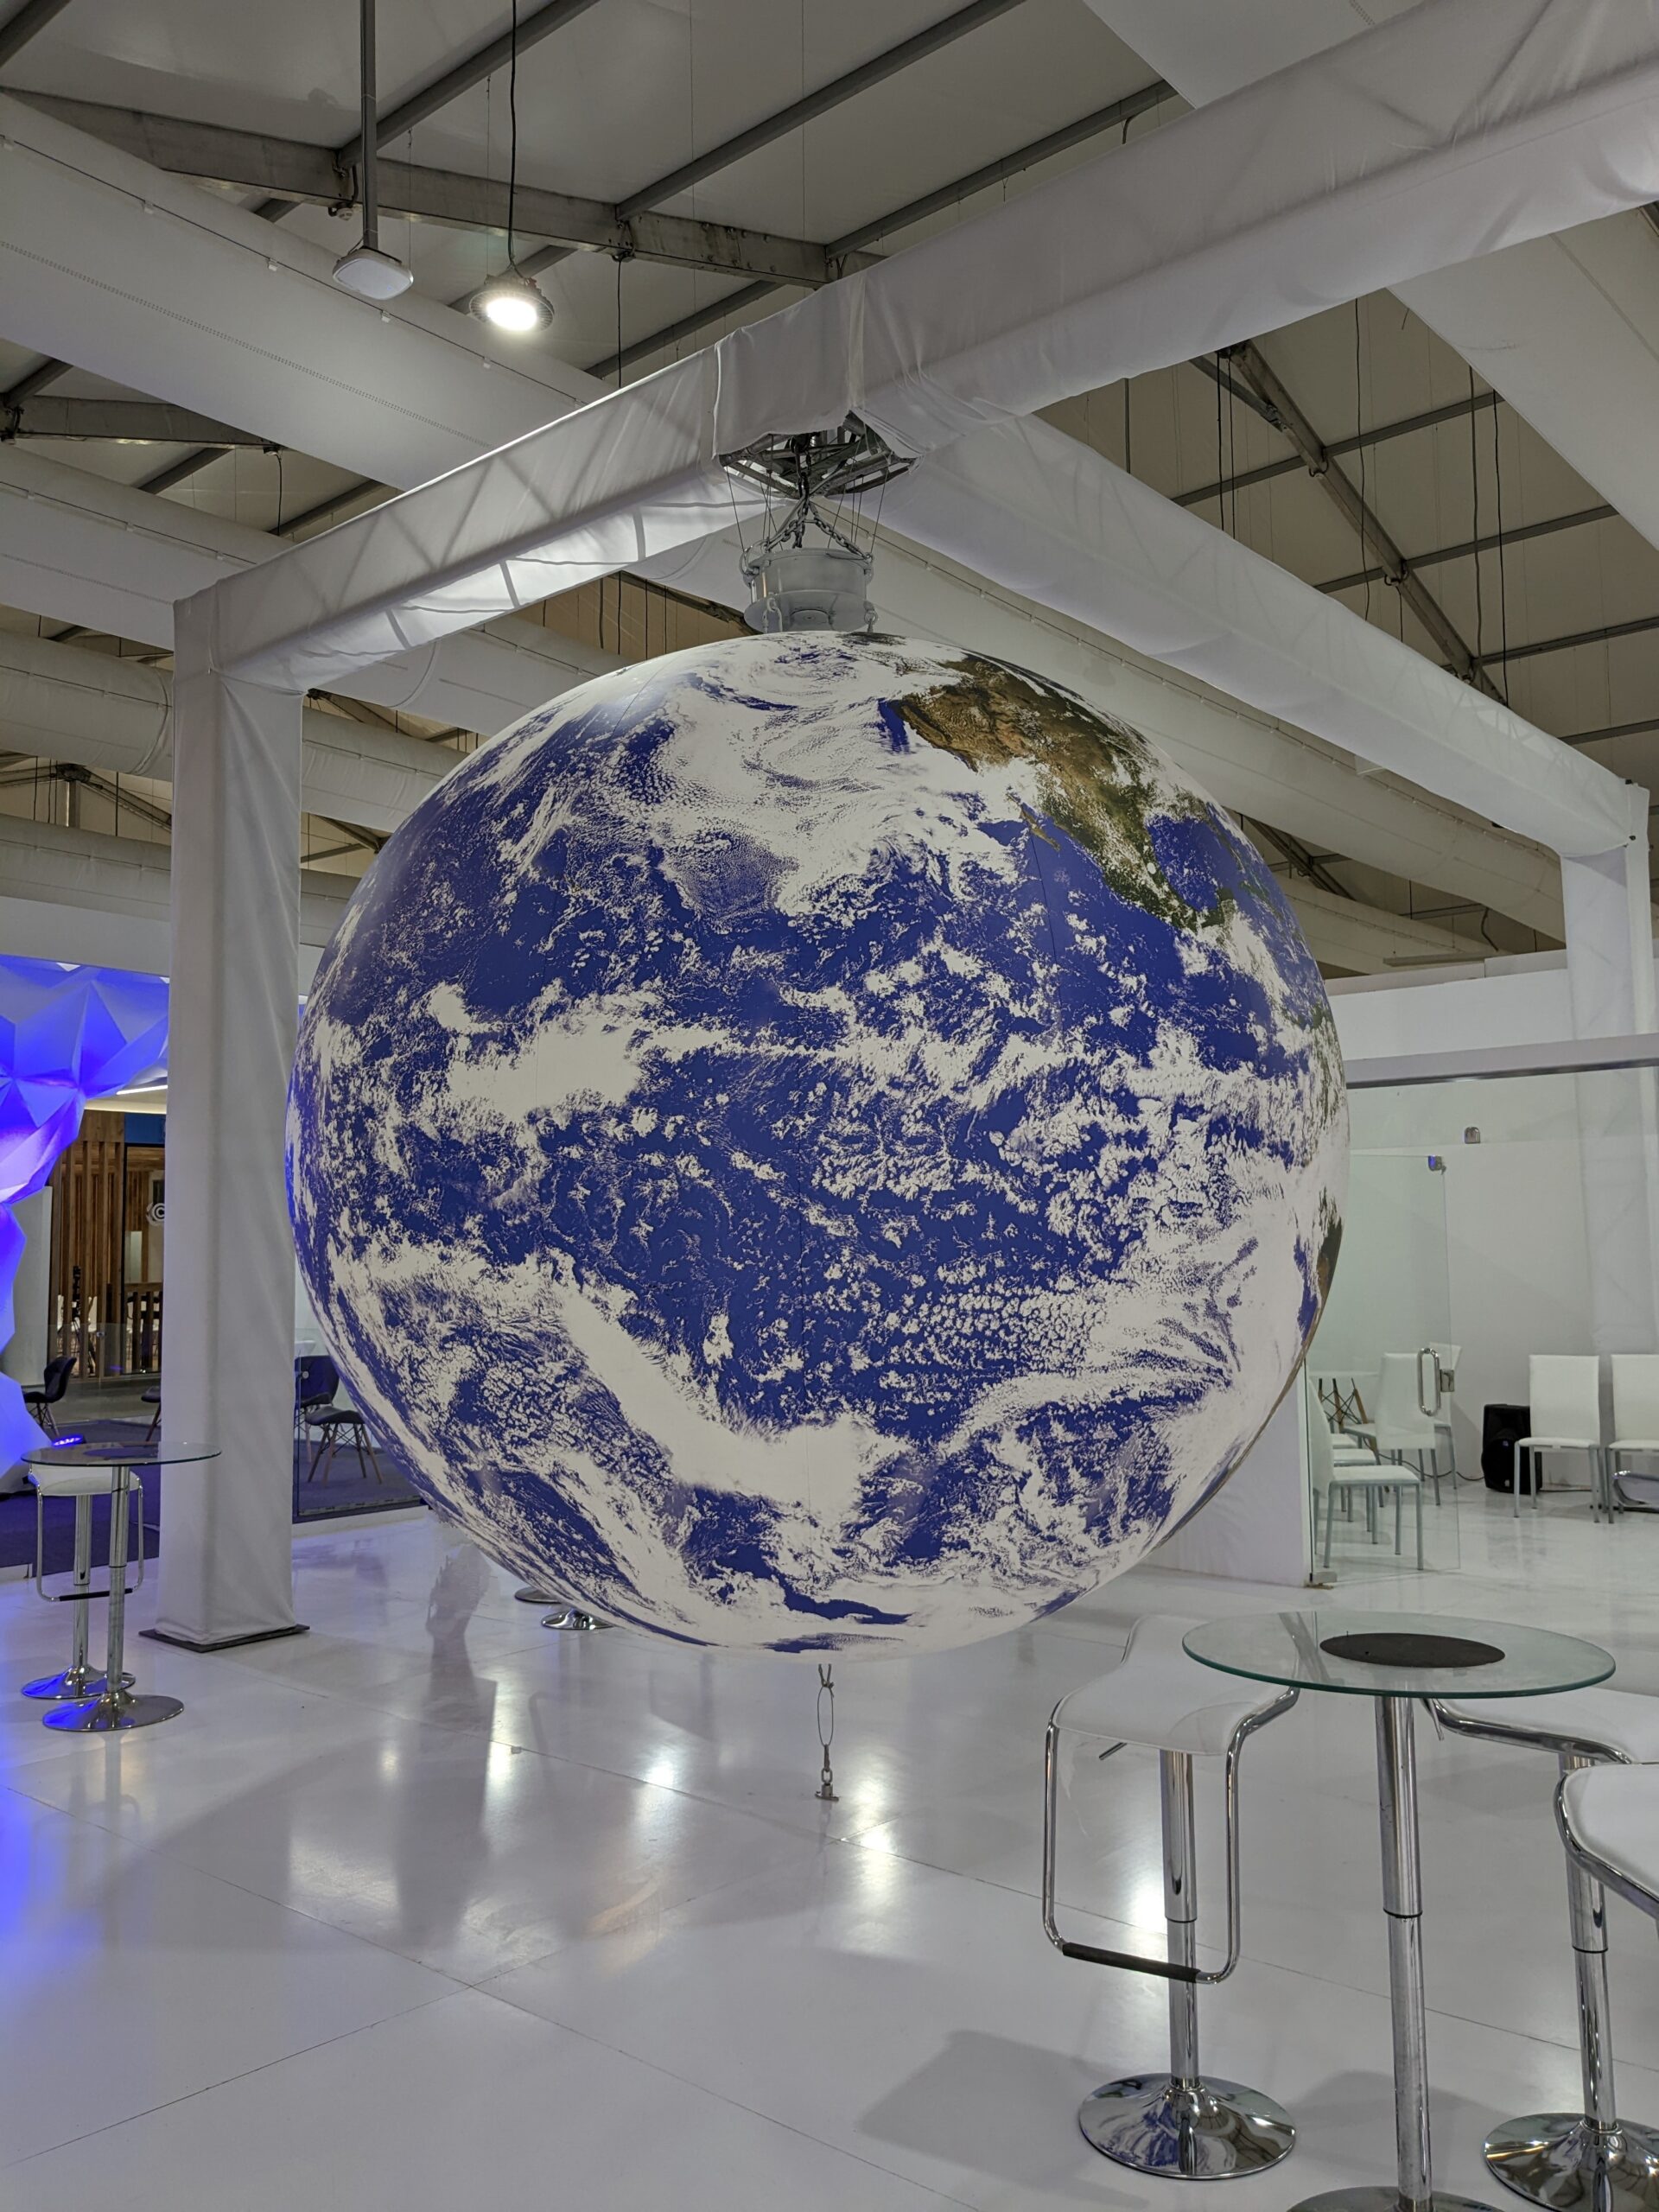 A large indoor model of the planet Earth